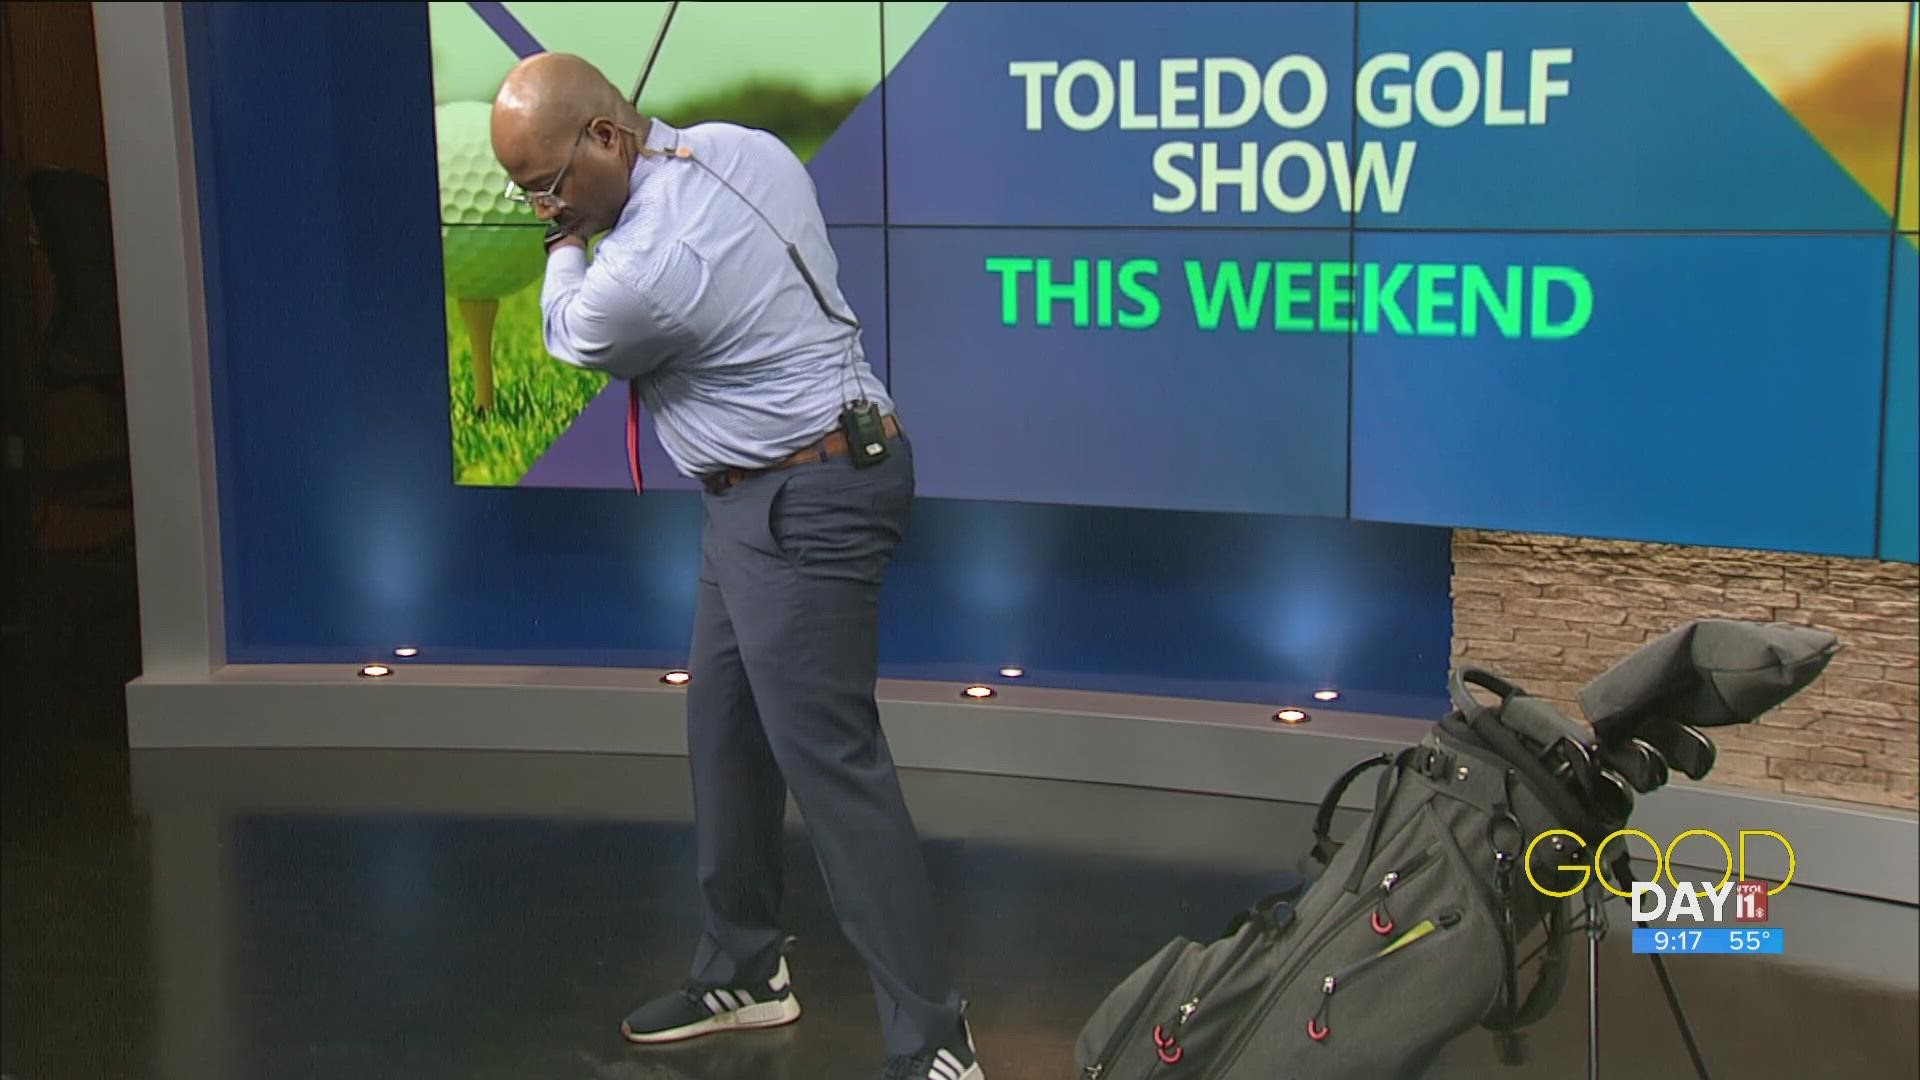 Andrew Brown from the Toledo Golf Show talks golfing deals and critiques Steven's swing.